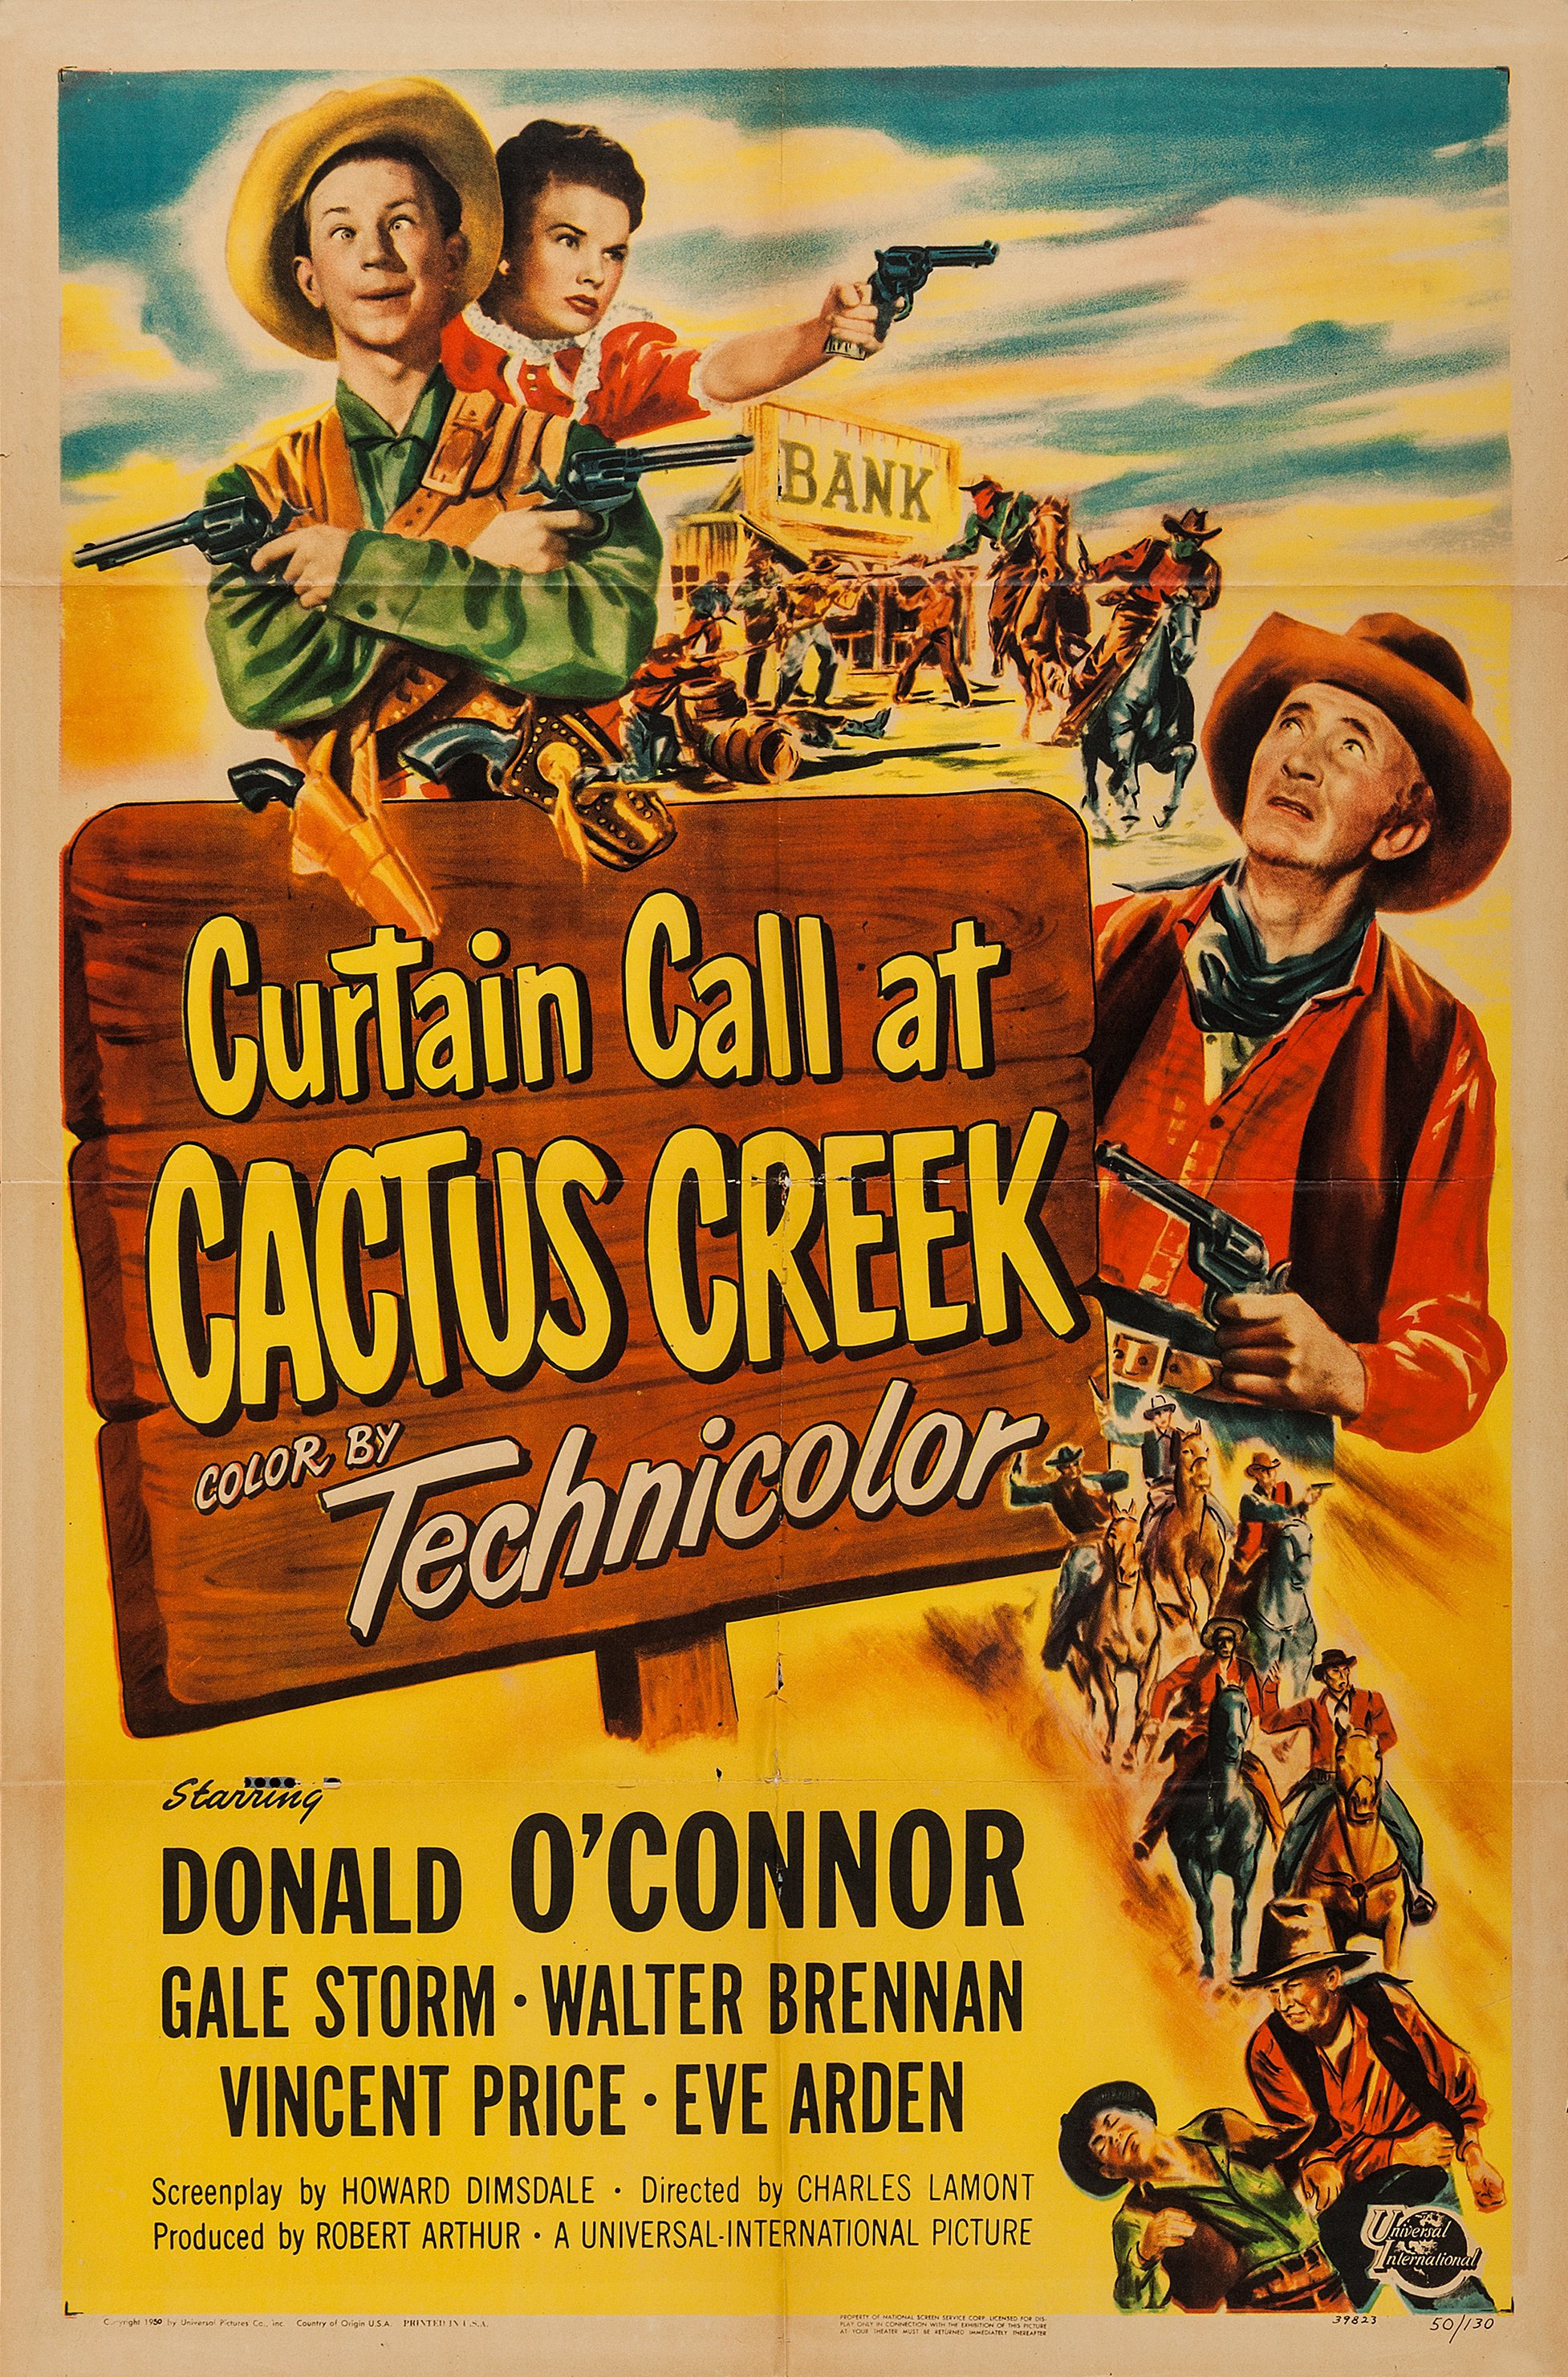 Mega Sized Movie Poster Image for Curtain Call at Cactus Creek 